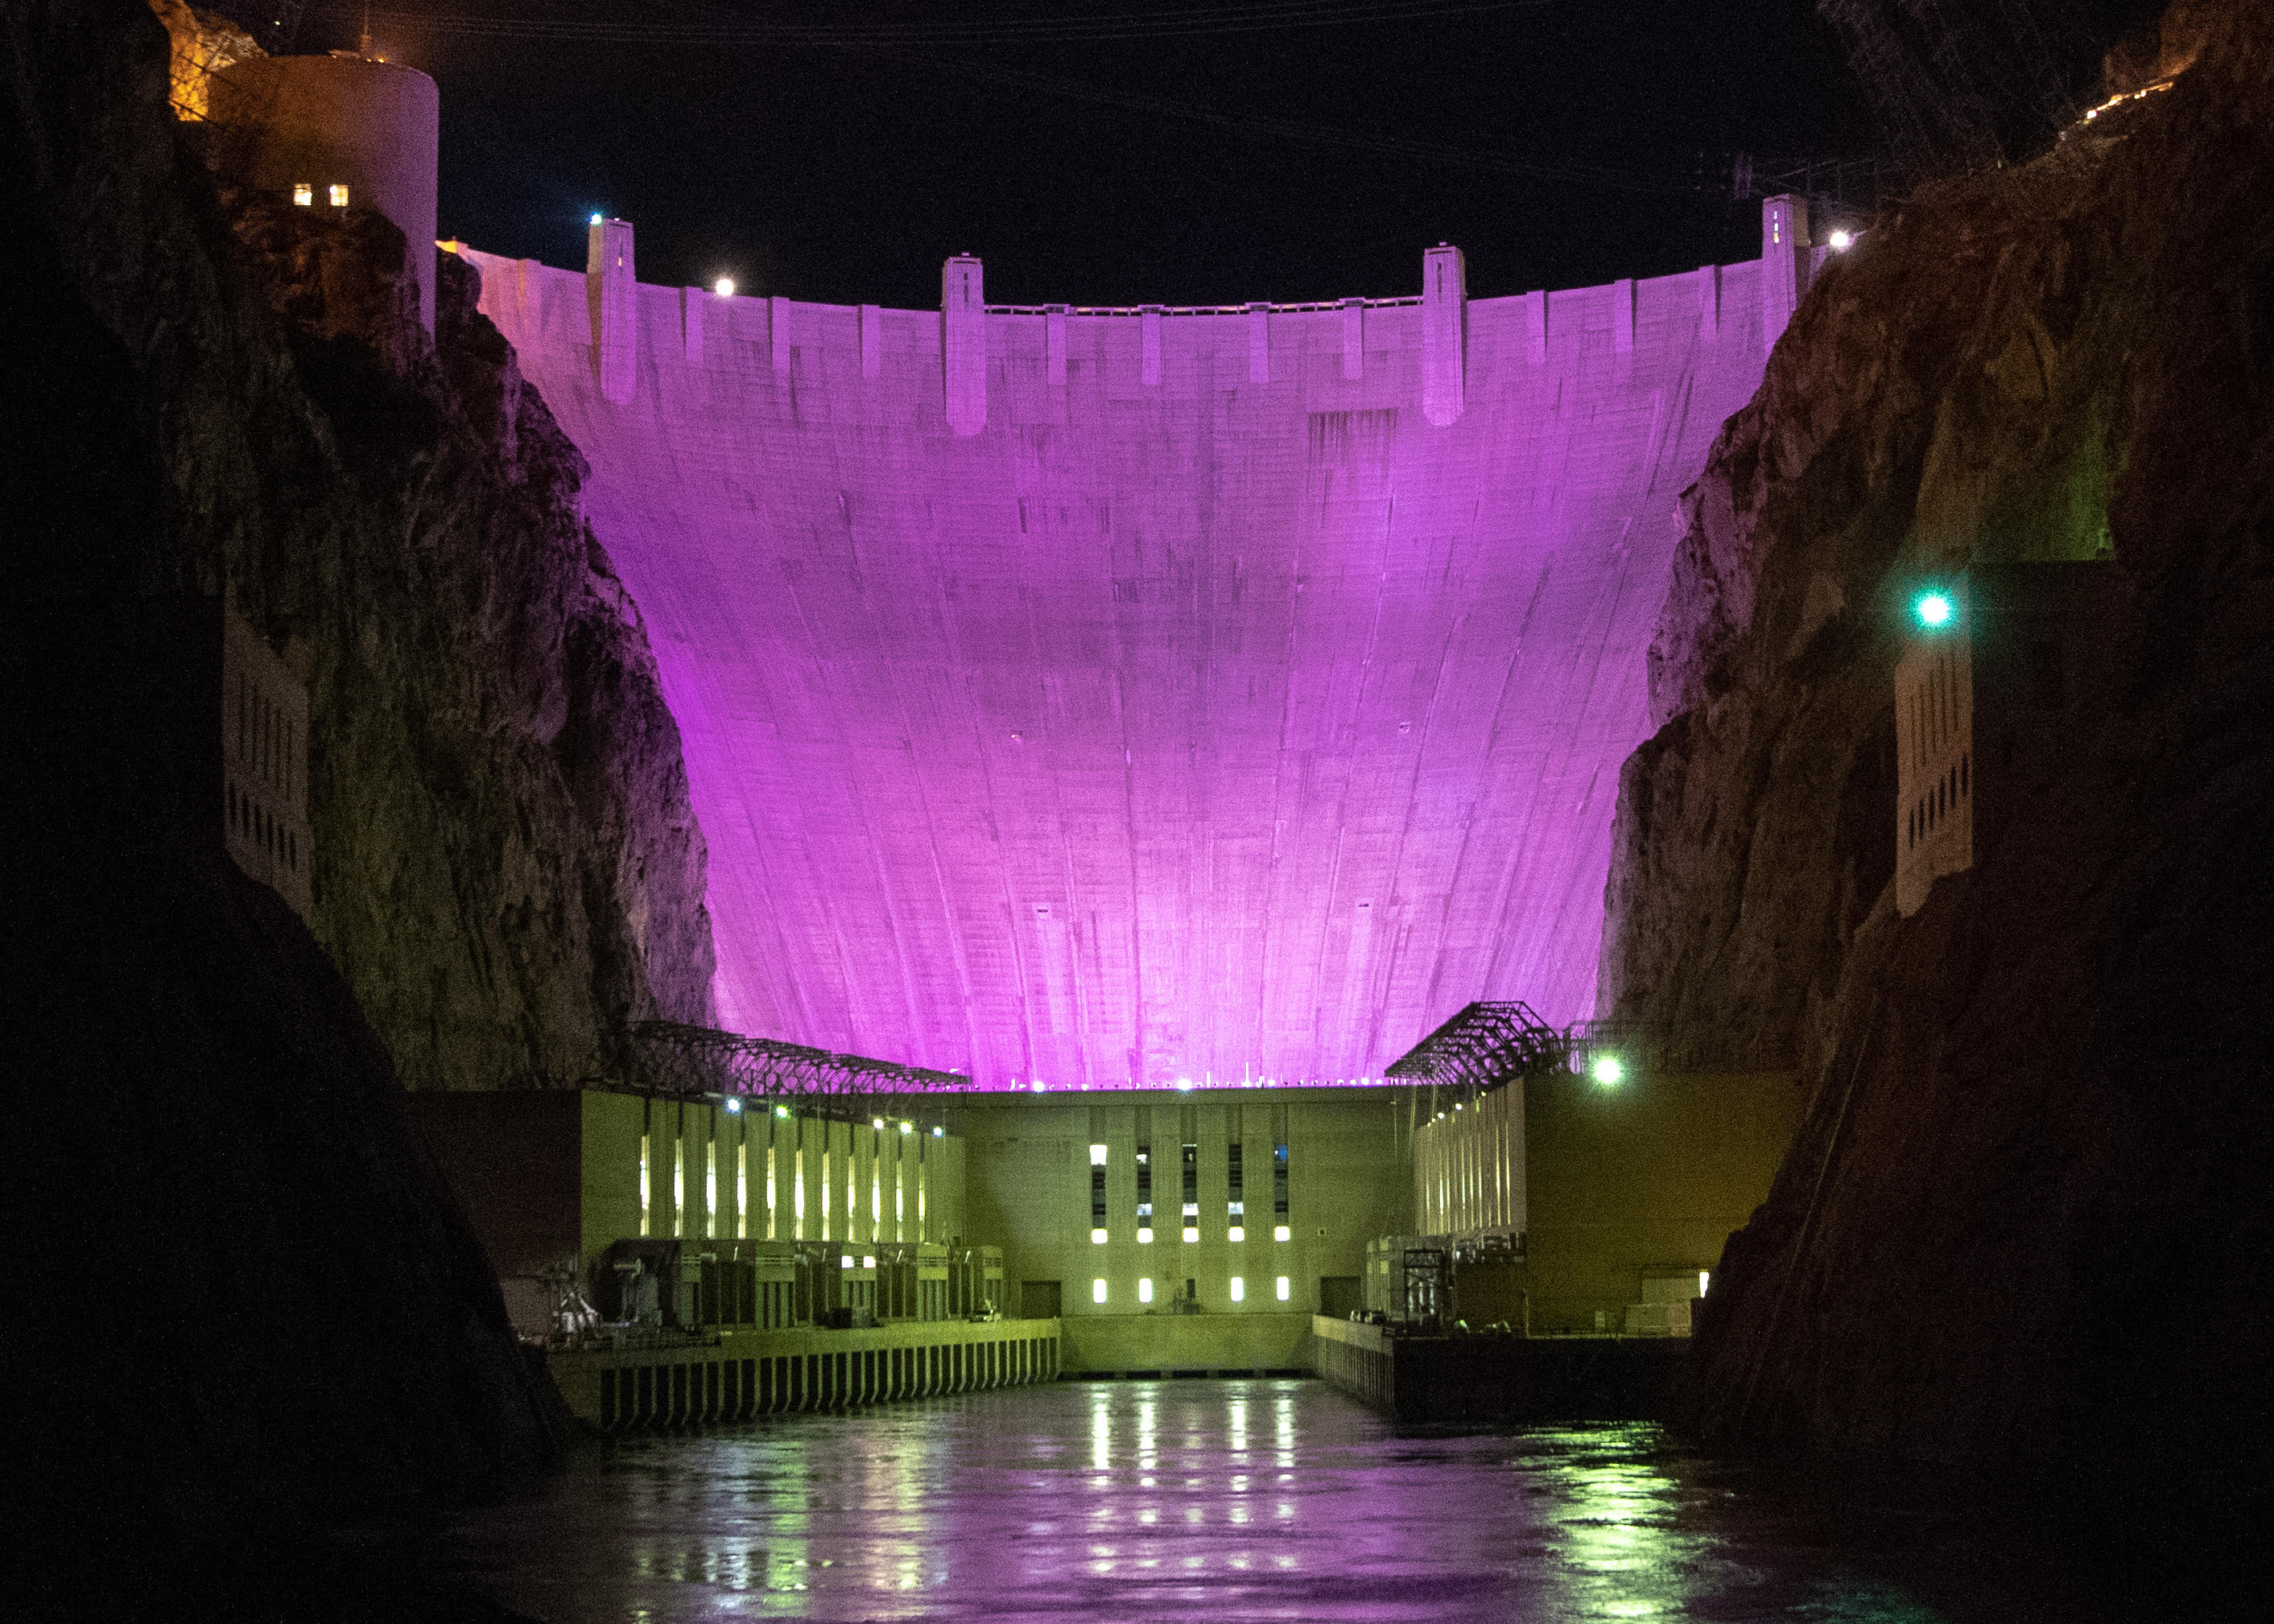 Hoover Dam was lit purple Monday night to raise awareness about the impacts of domestic violence.